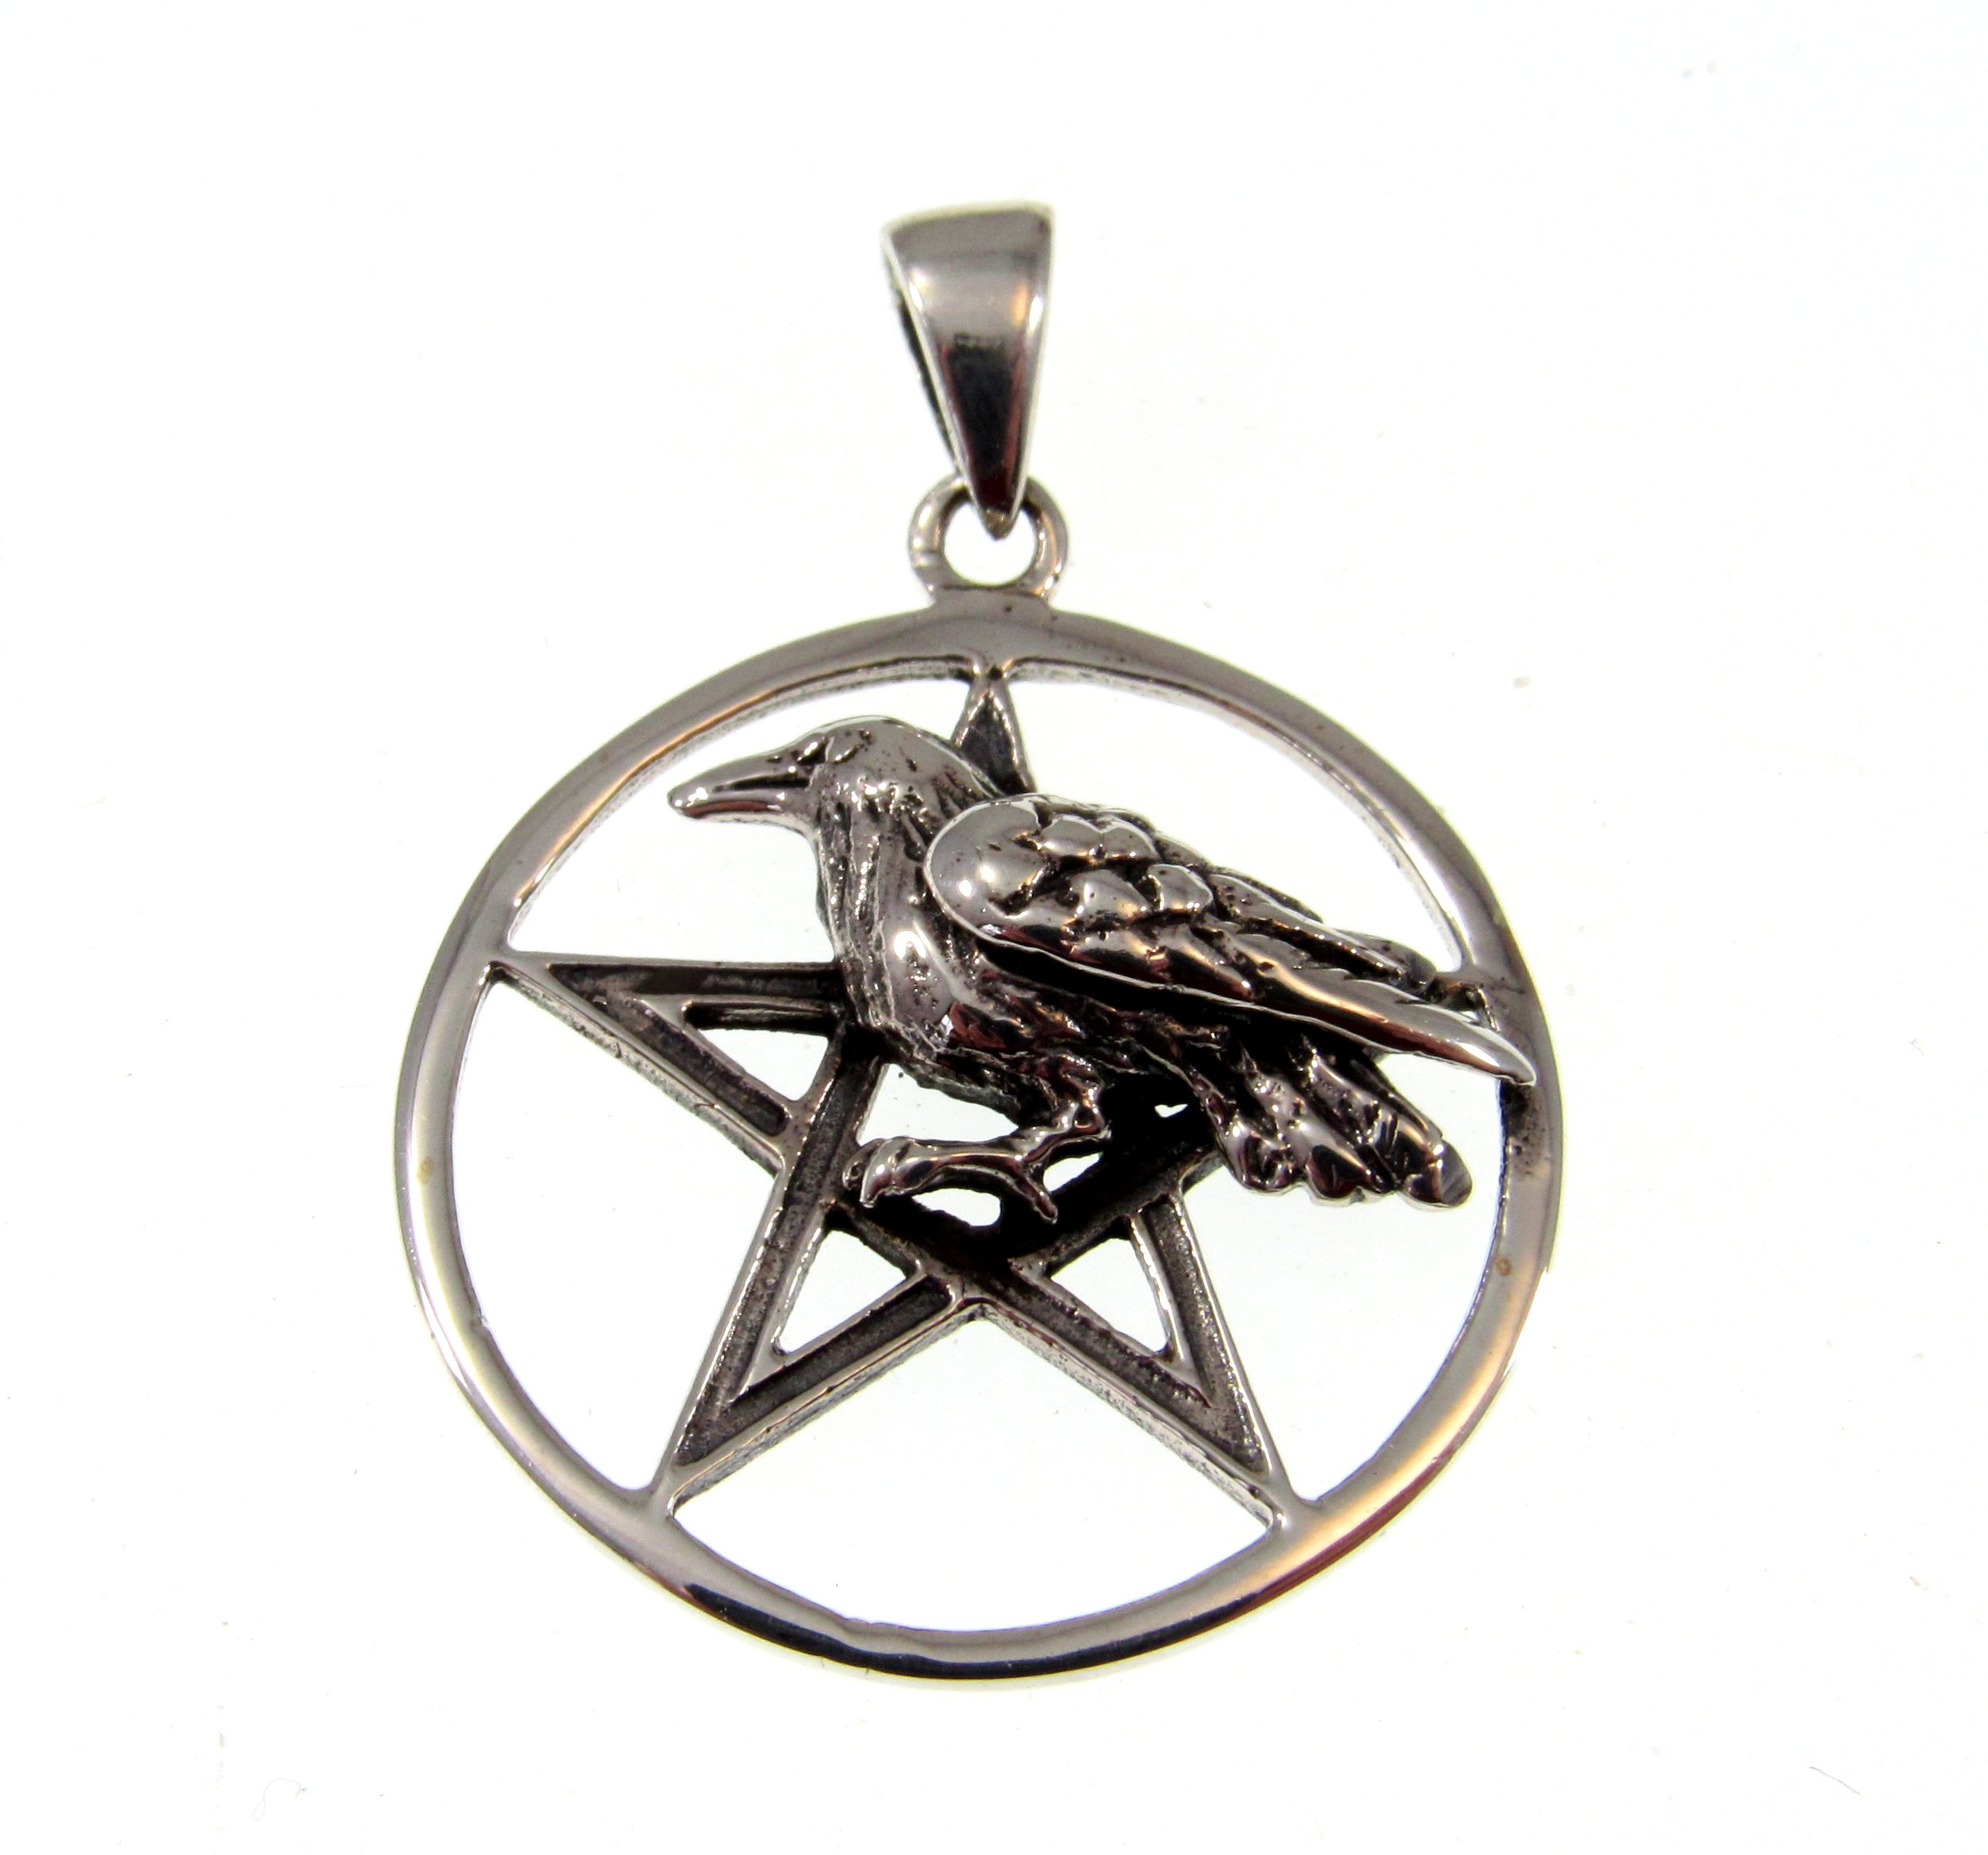 Magick jewelry Occult jewelry Goetic demon Pagan jewelry Rune necklace Pentacle necklace Necronomicon Necklace Decarabia Jewelry